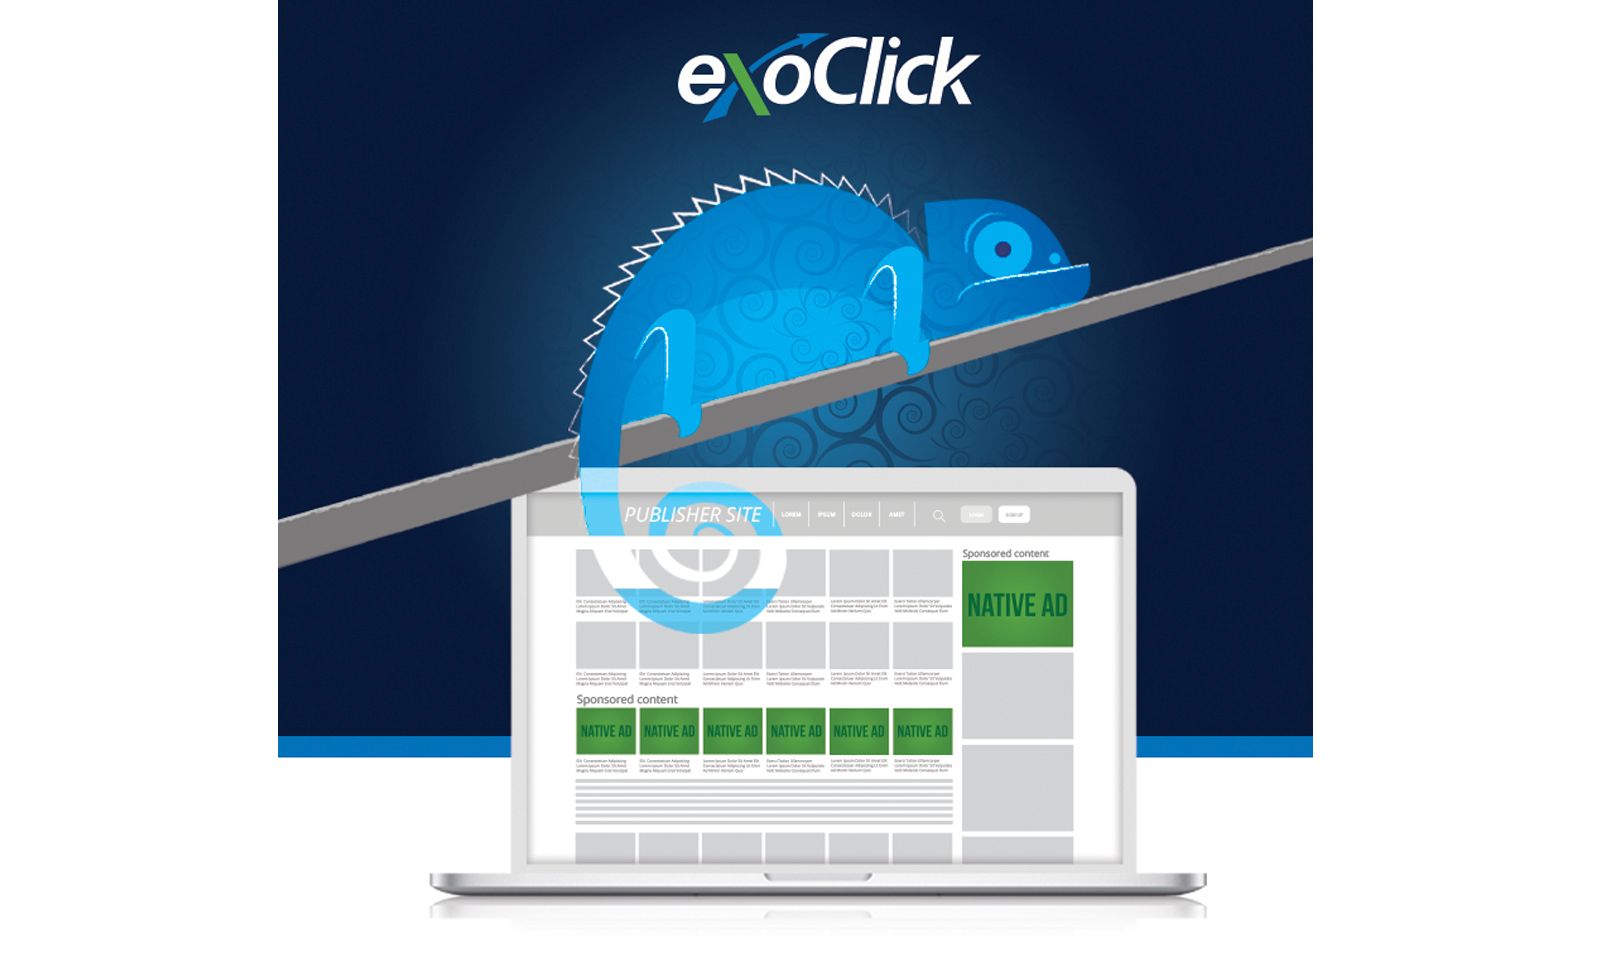 ExoClick Adds Features to Native Advertising, Extends Cash Back Promo